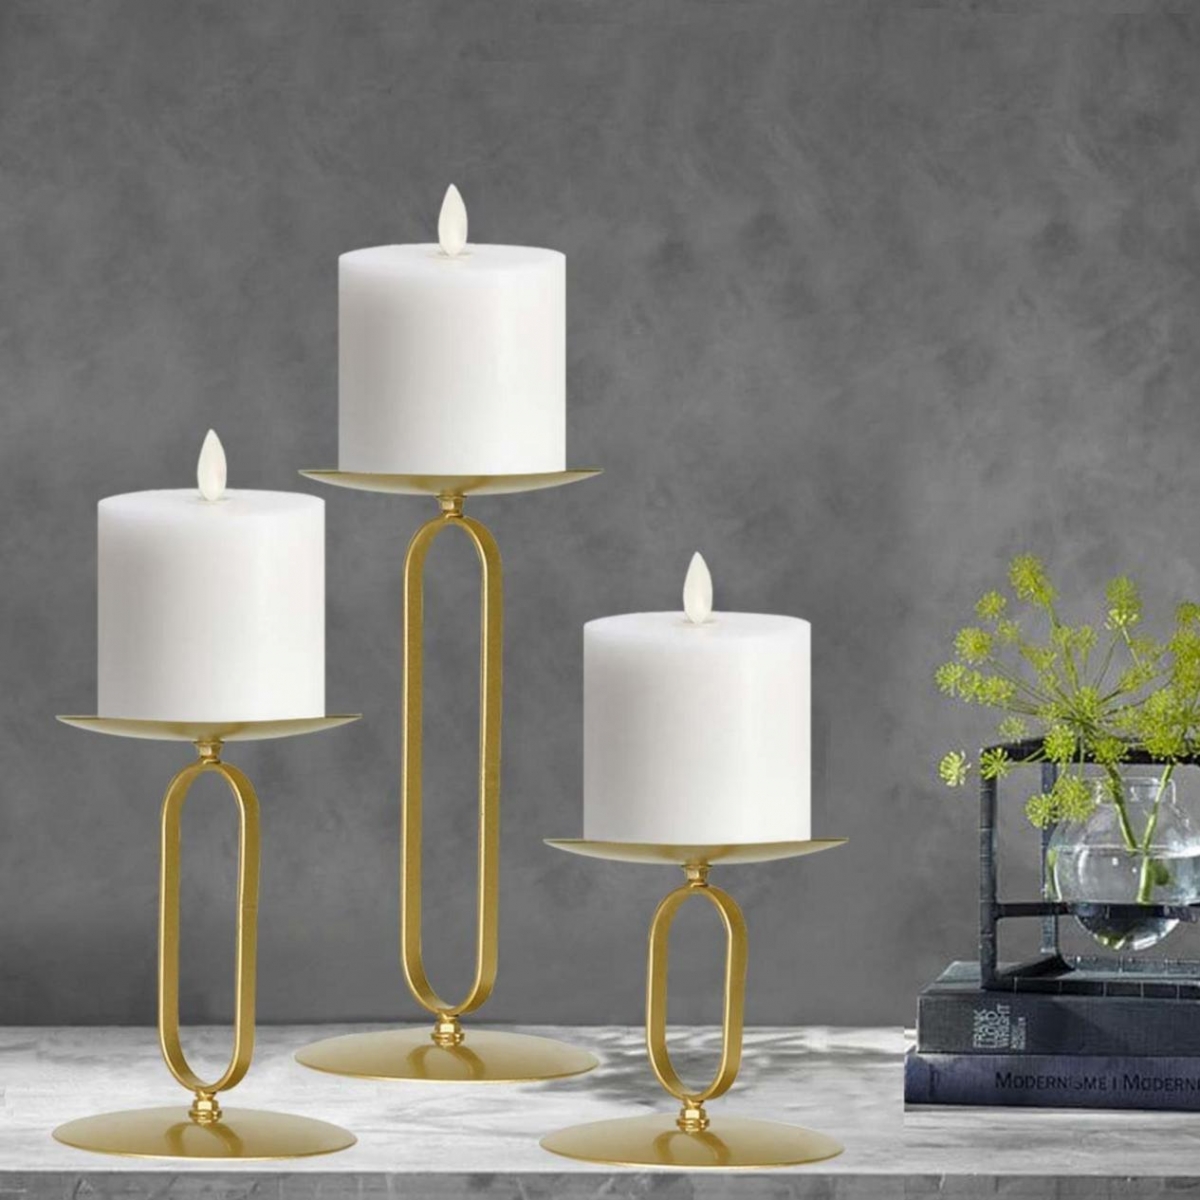 Set Of 3 Pillar Round Metal Gold Vintage Table Centerpiece Candle Stand Holder-GOON- Home Decoration, Christmas Decoration, Halloween Decor, Harvest Decor, Easter Decor, Thanksgiving Day Decor, Party Decor